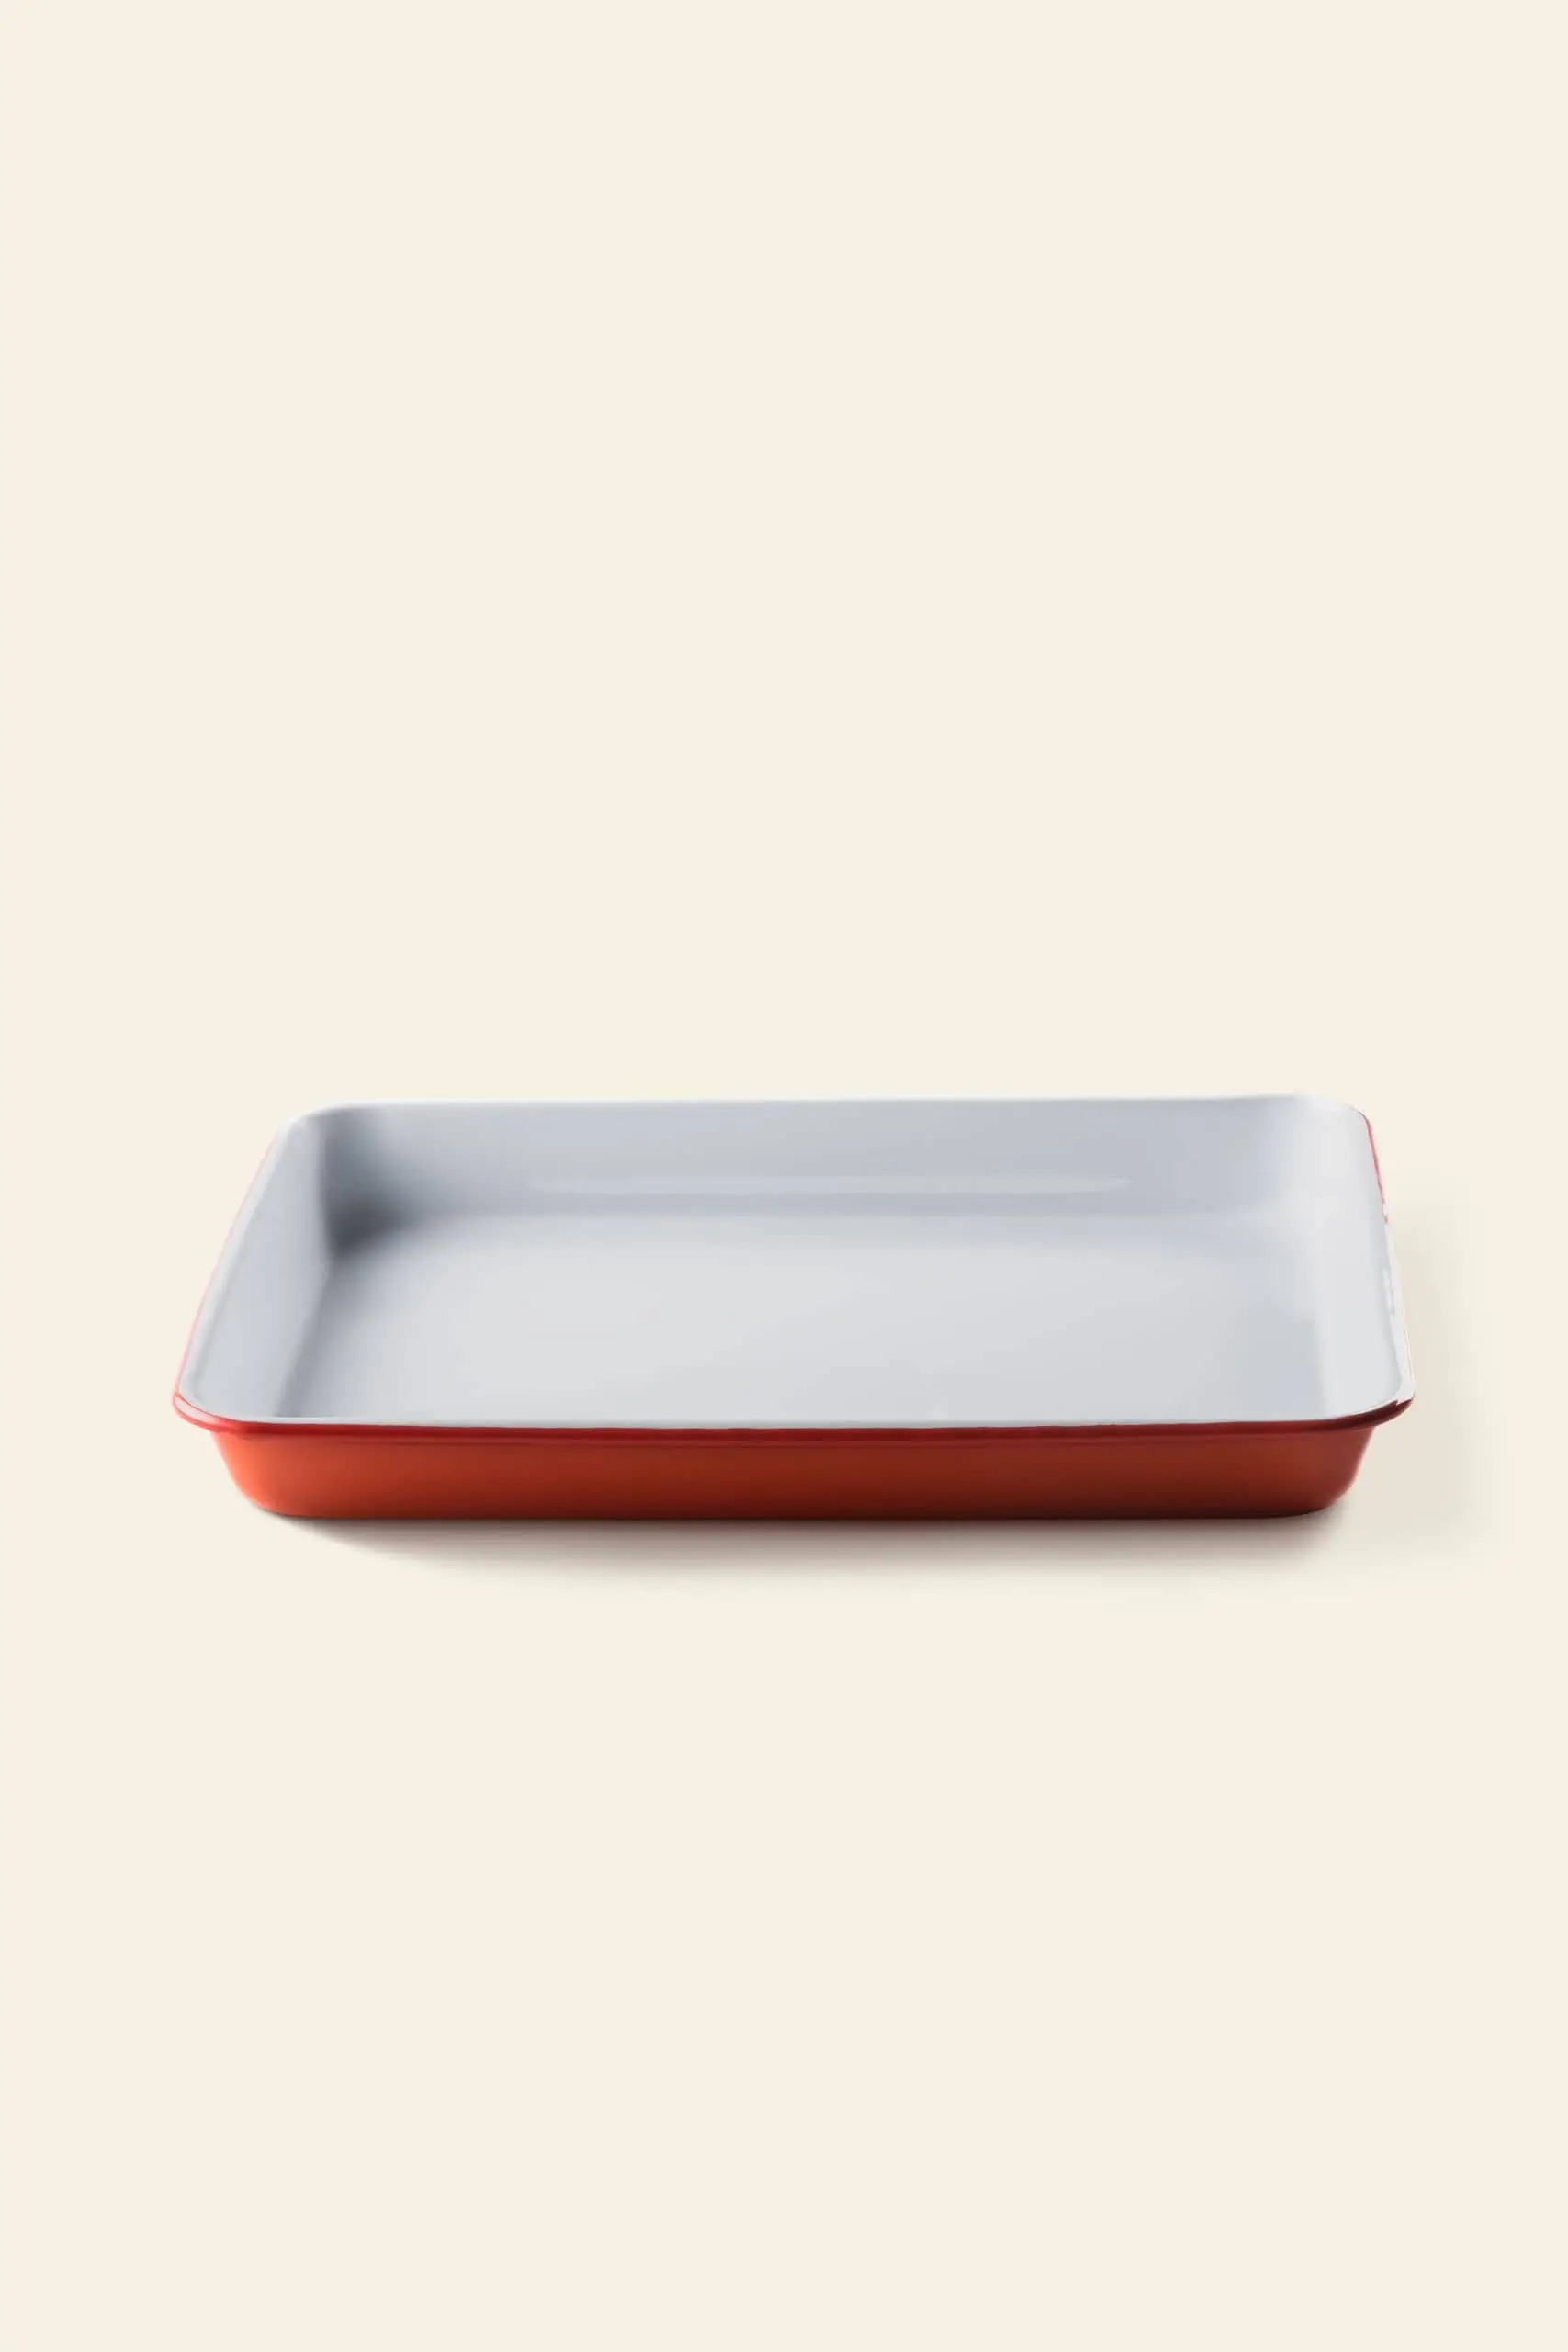 Falcon Enamelware Serving Tray Pillarbox Red 2